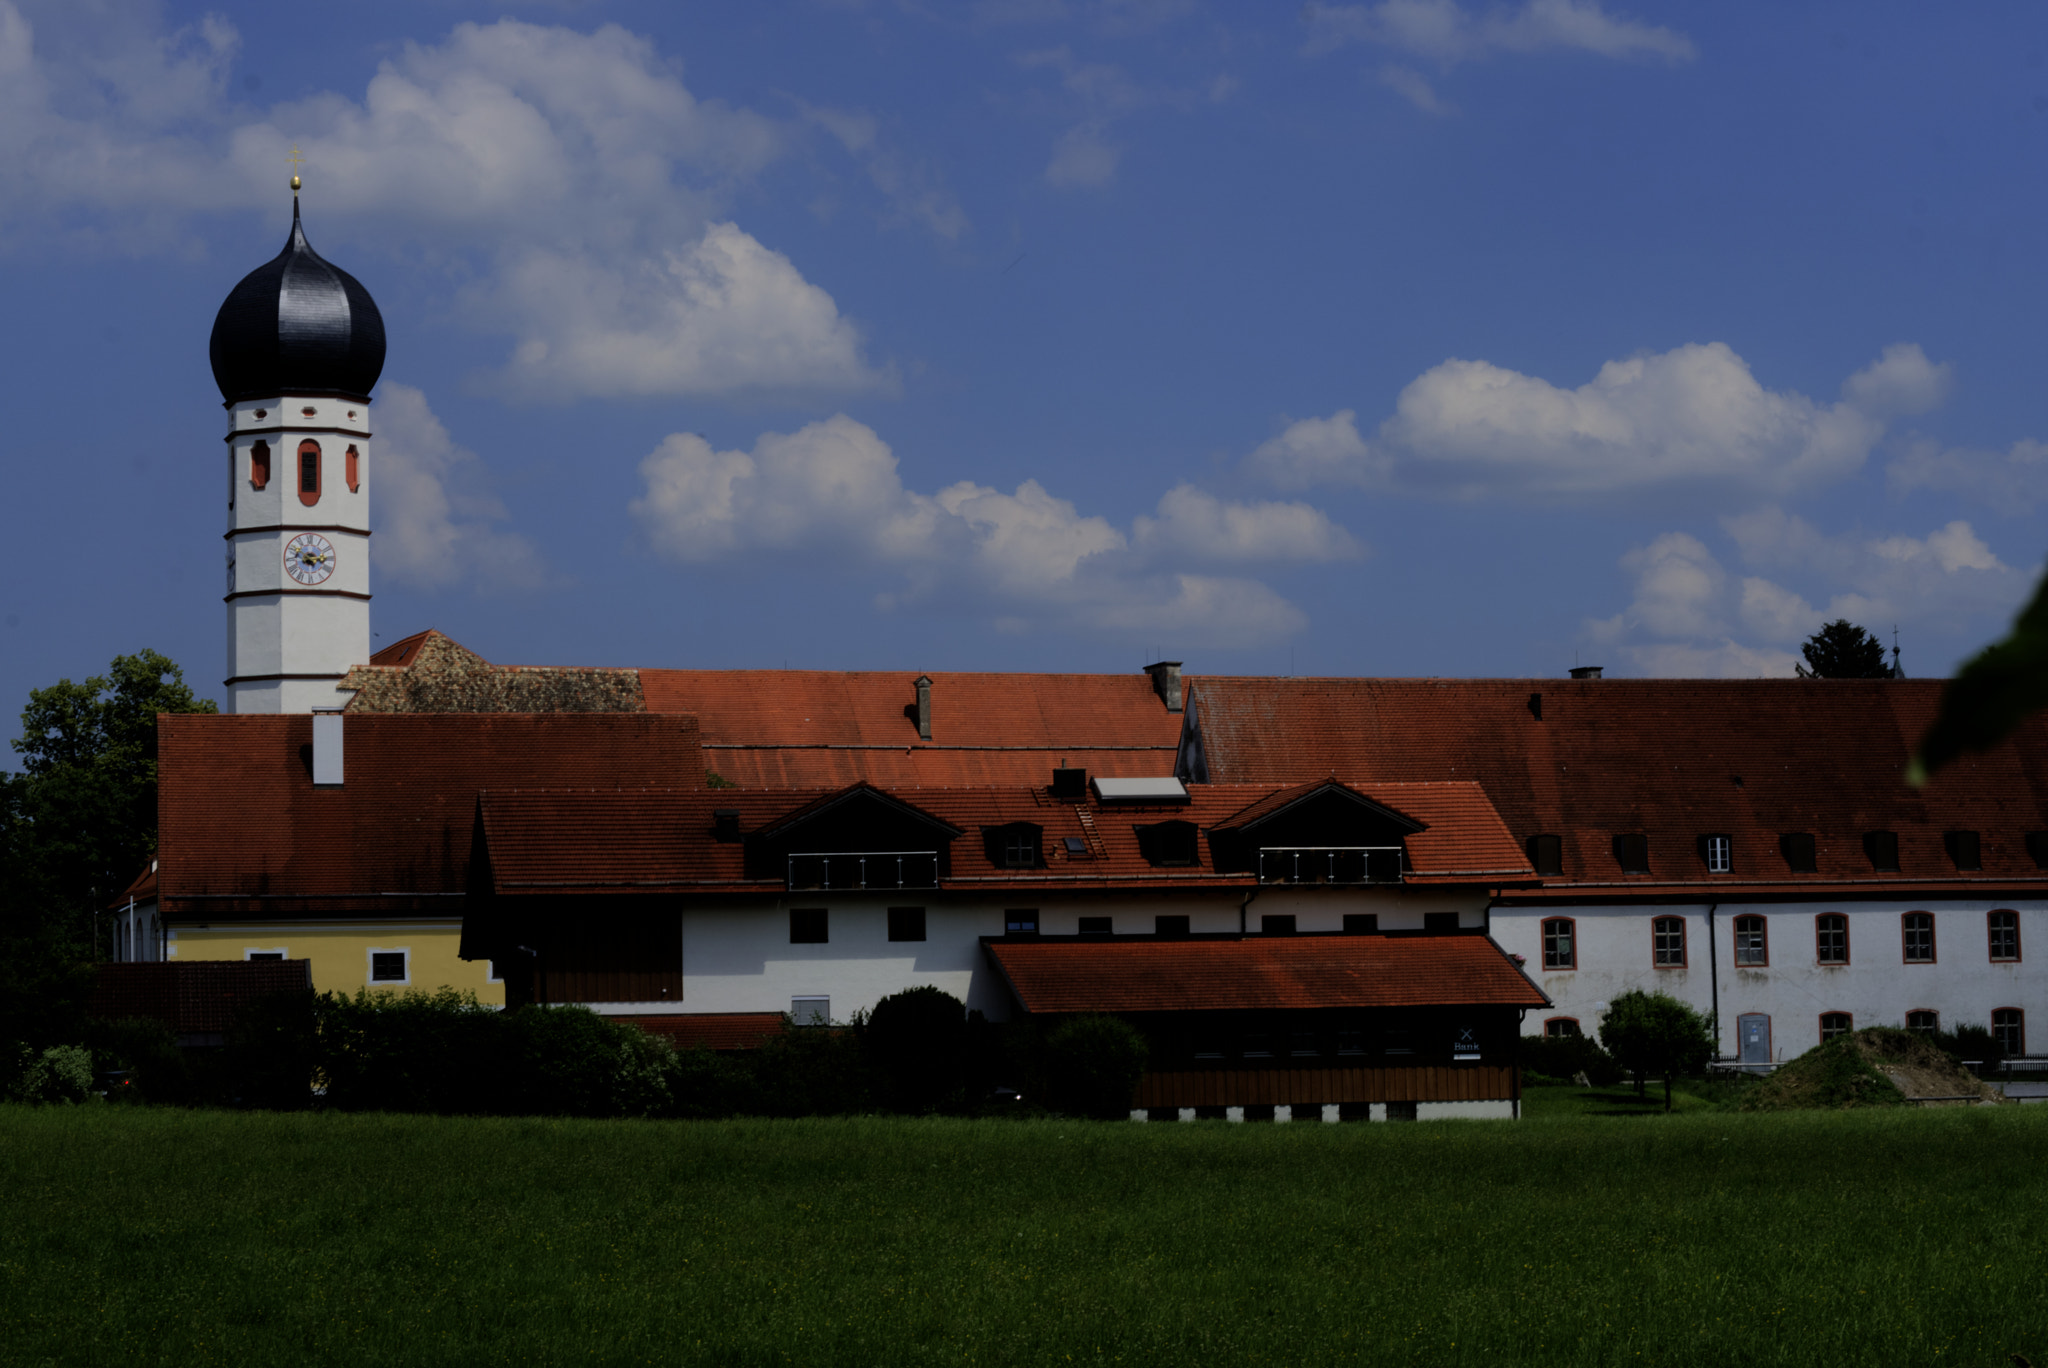 Sony a6000 sample photo. Kloster beuerberg in ganzer pracht photography